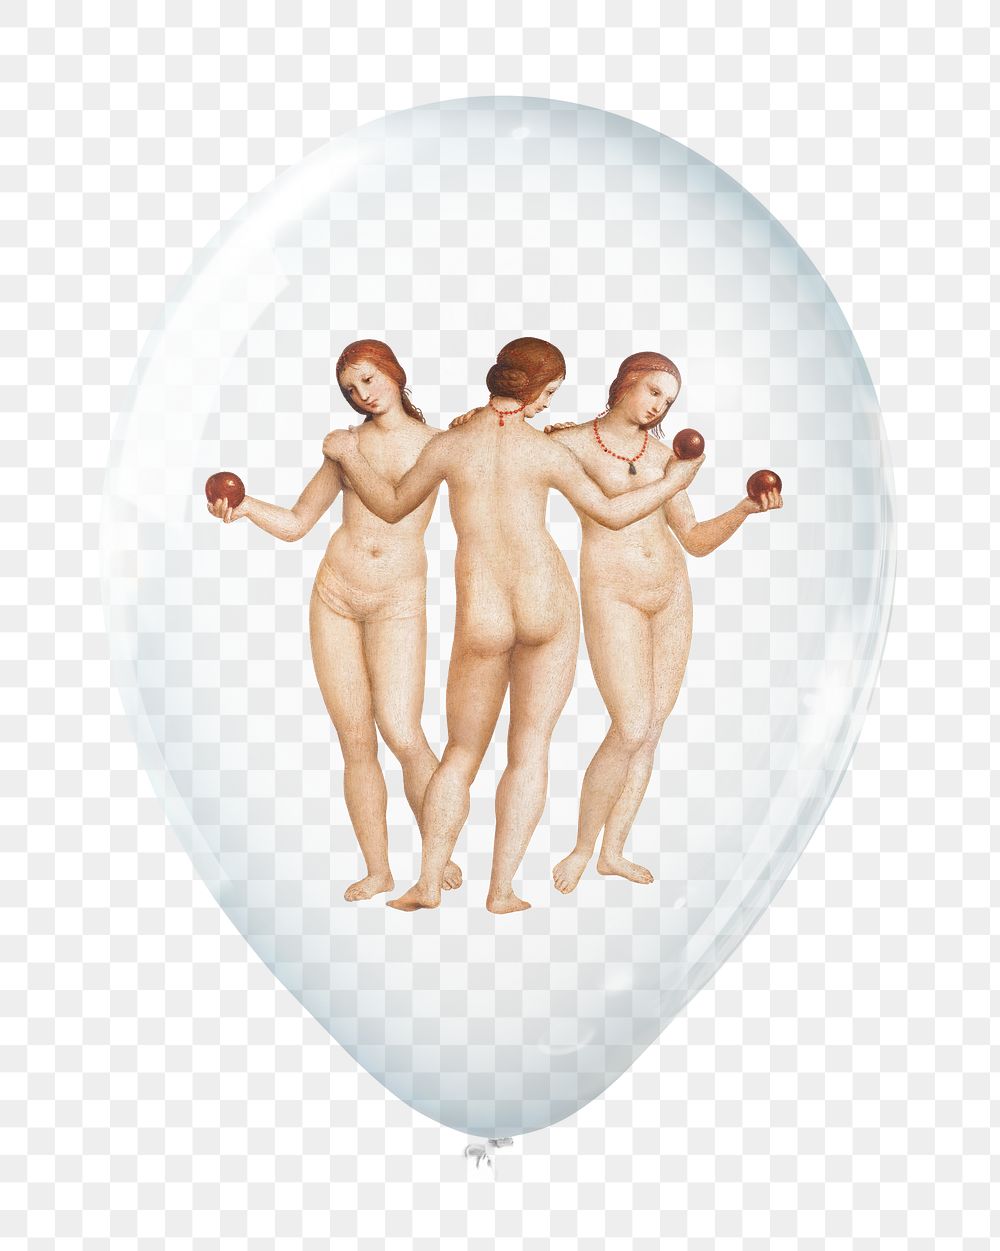 Three Graces png, in clear balloon, Antonio Canova's famous artwork, transparent background, remixed by rawpixel